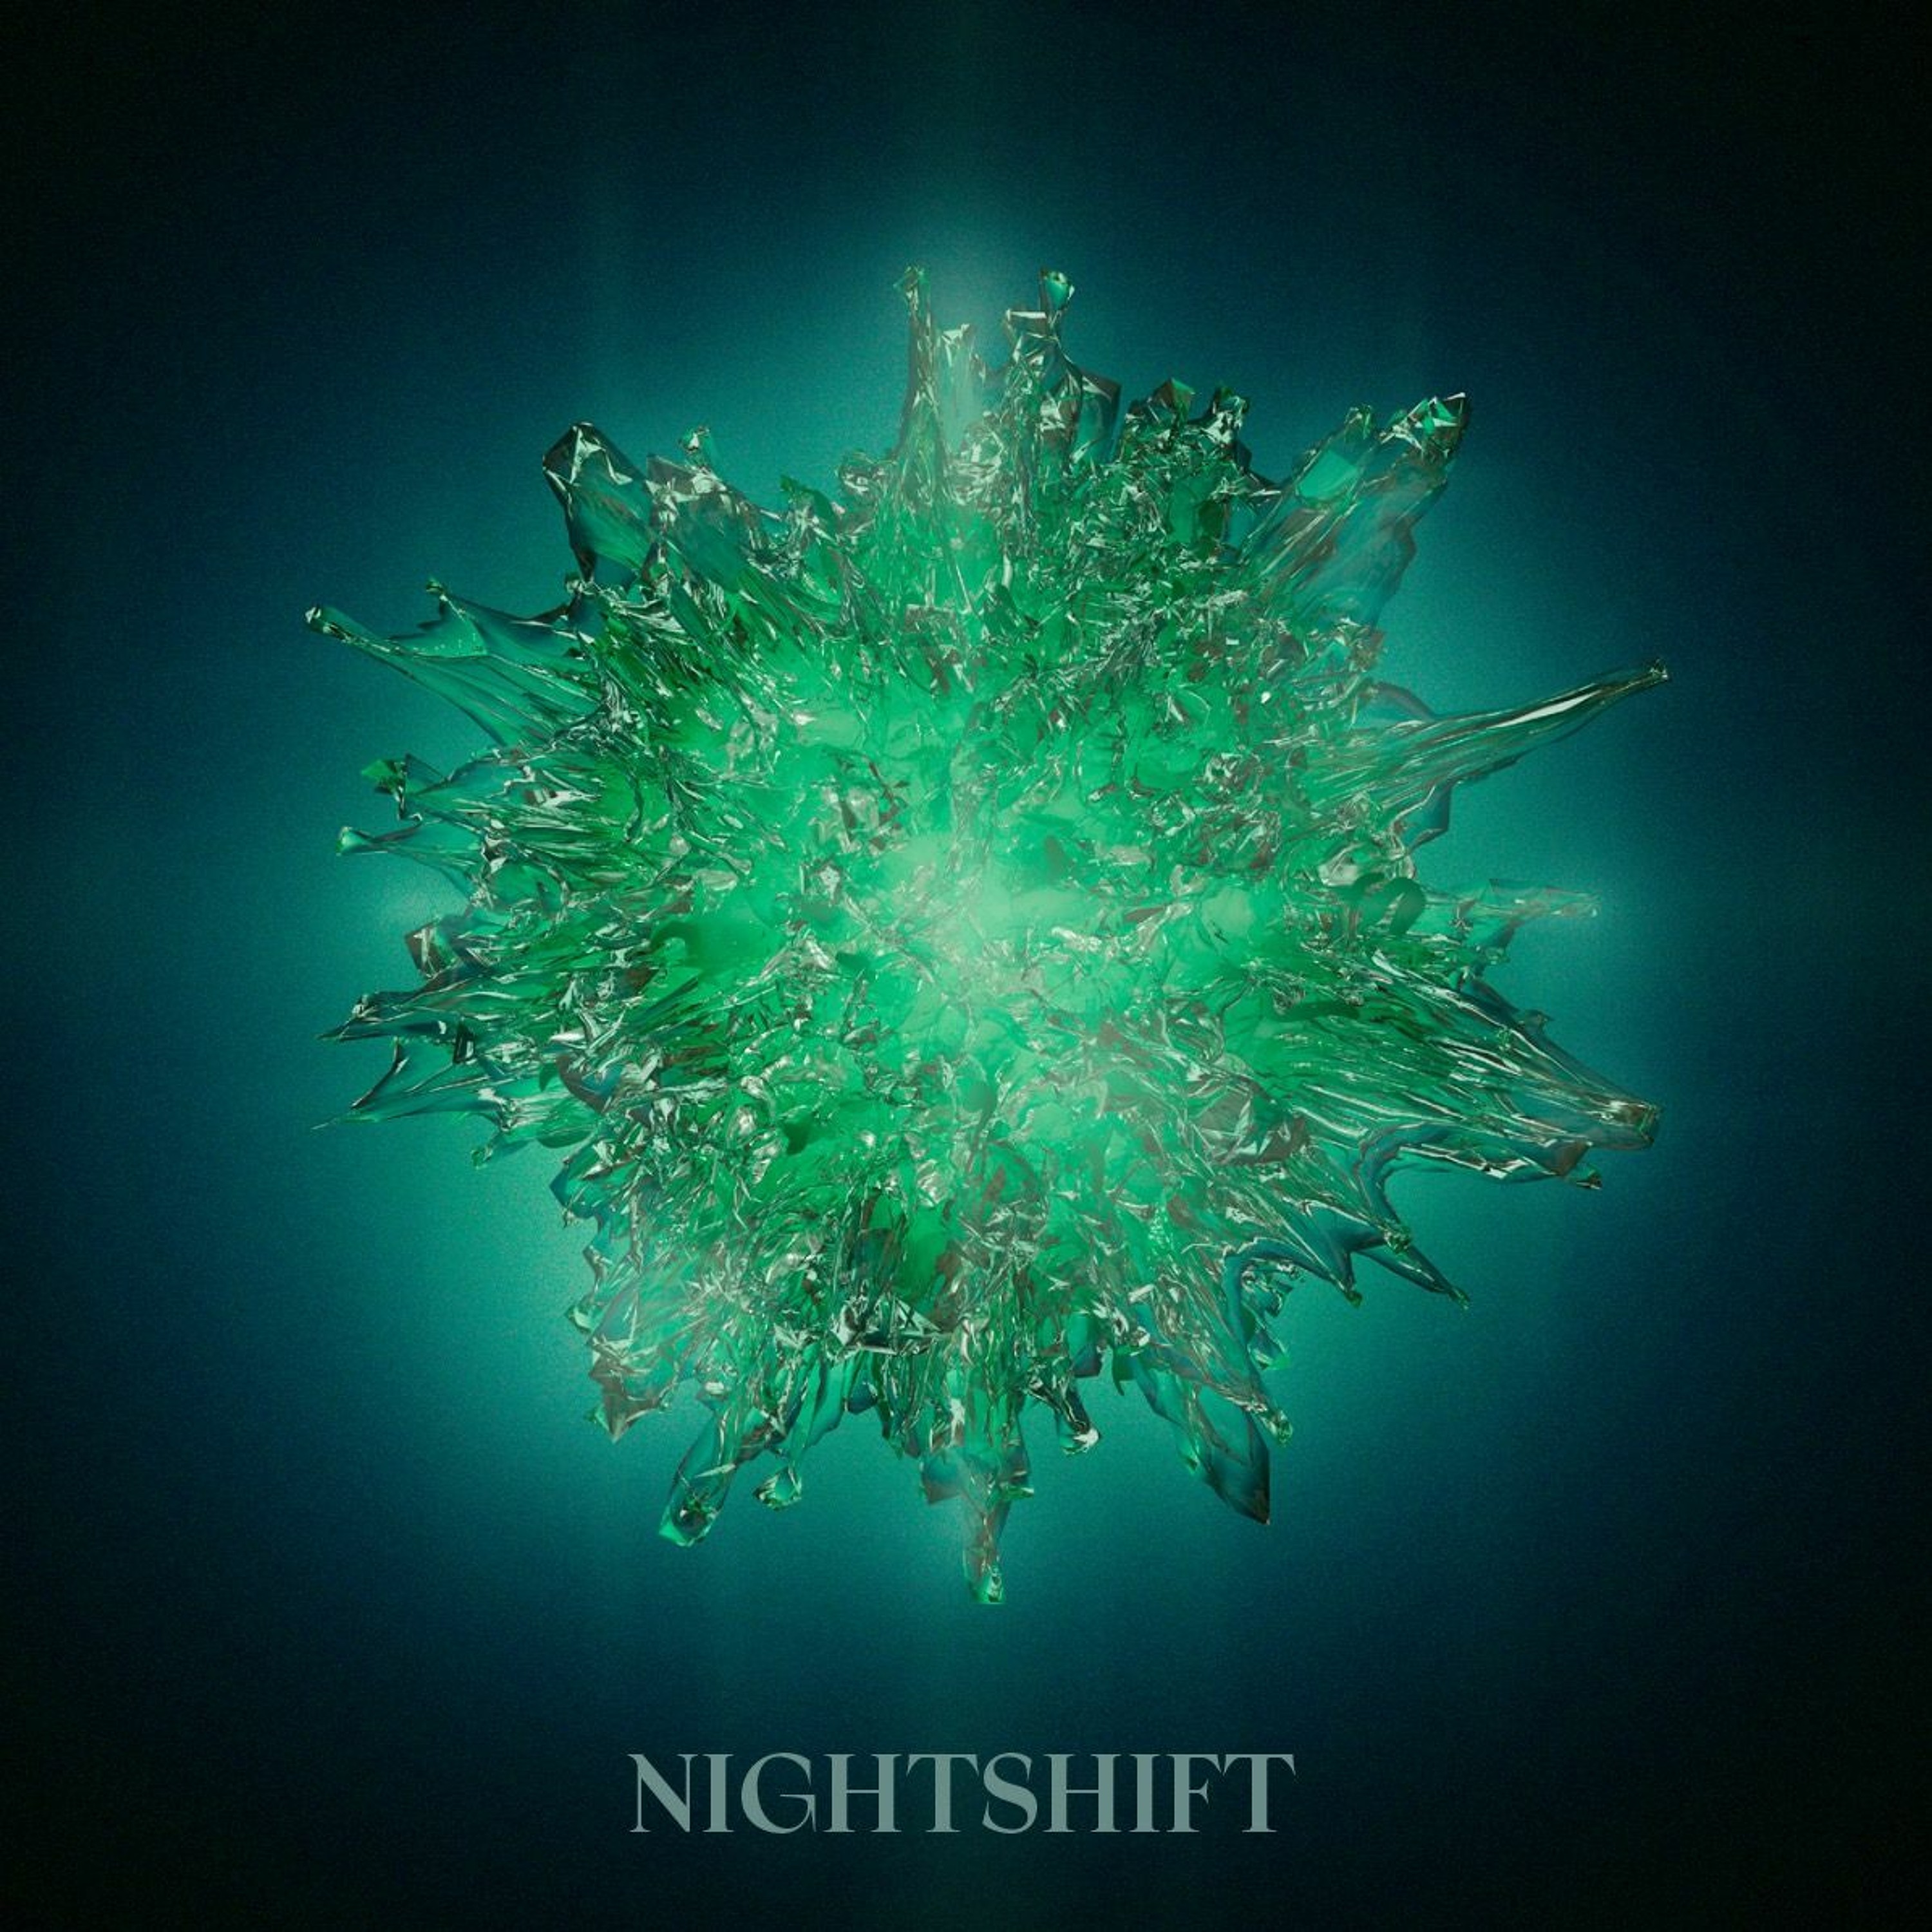 Nightshift #3: The sonic landscapes of drone – Touch Records tribute